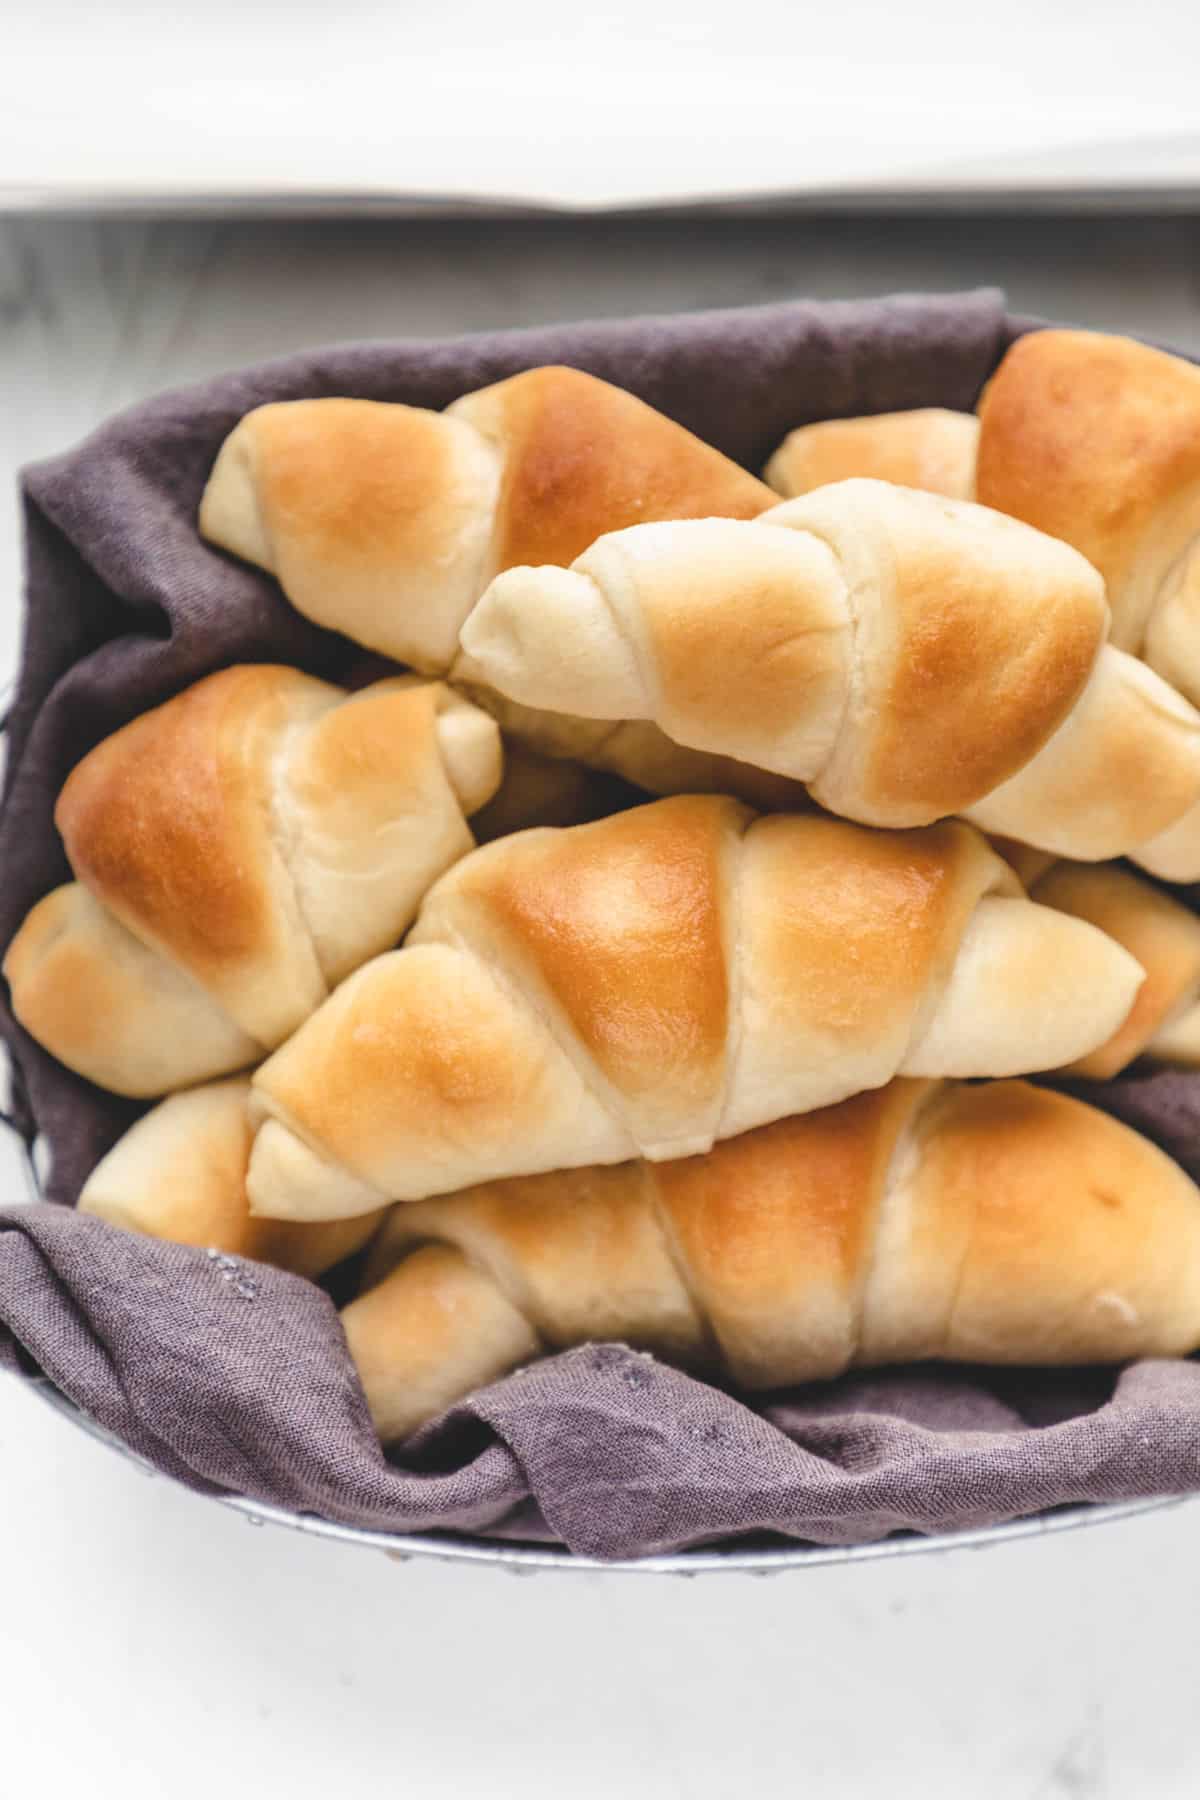 Homemade Crescent Rolls (+Video) - The Country Cook